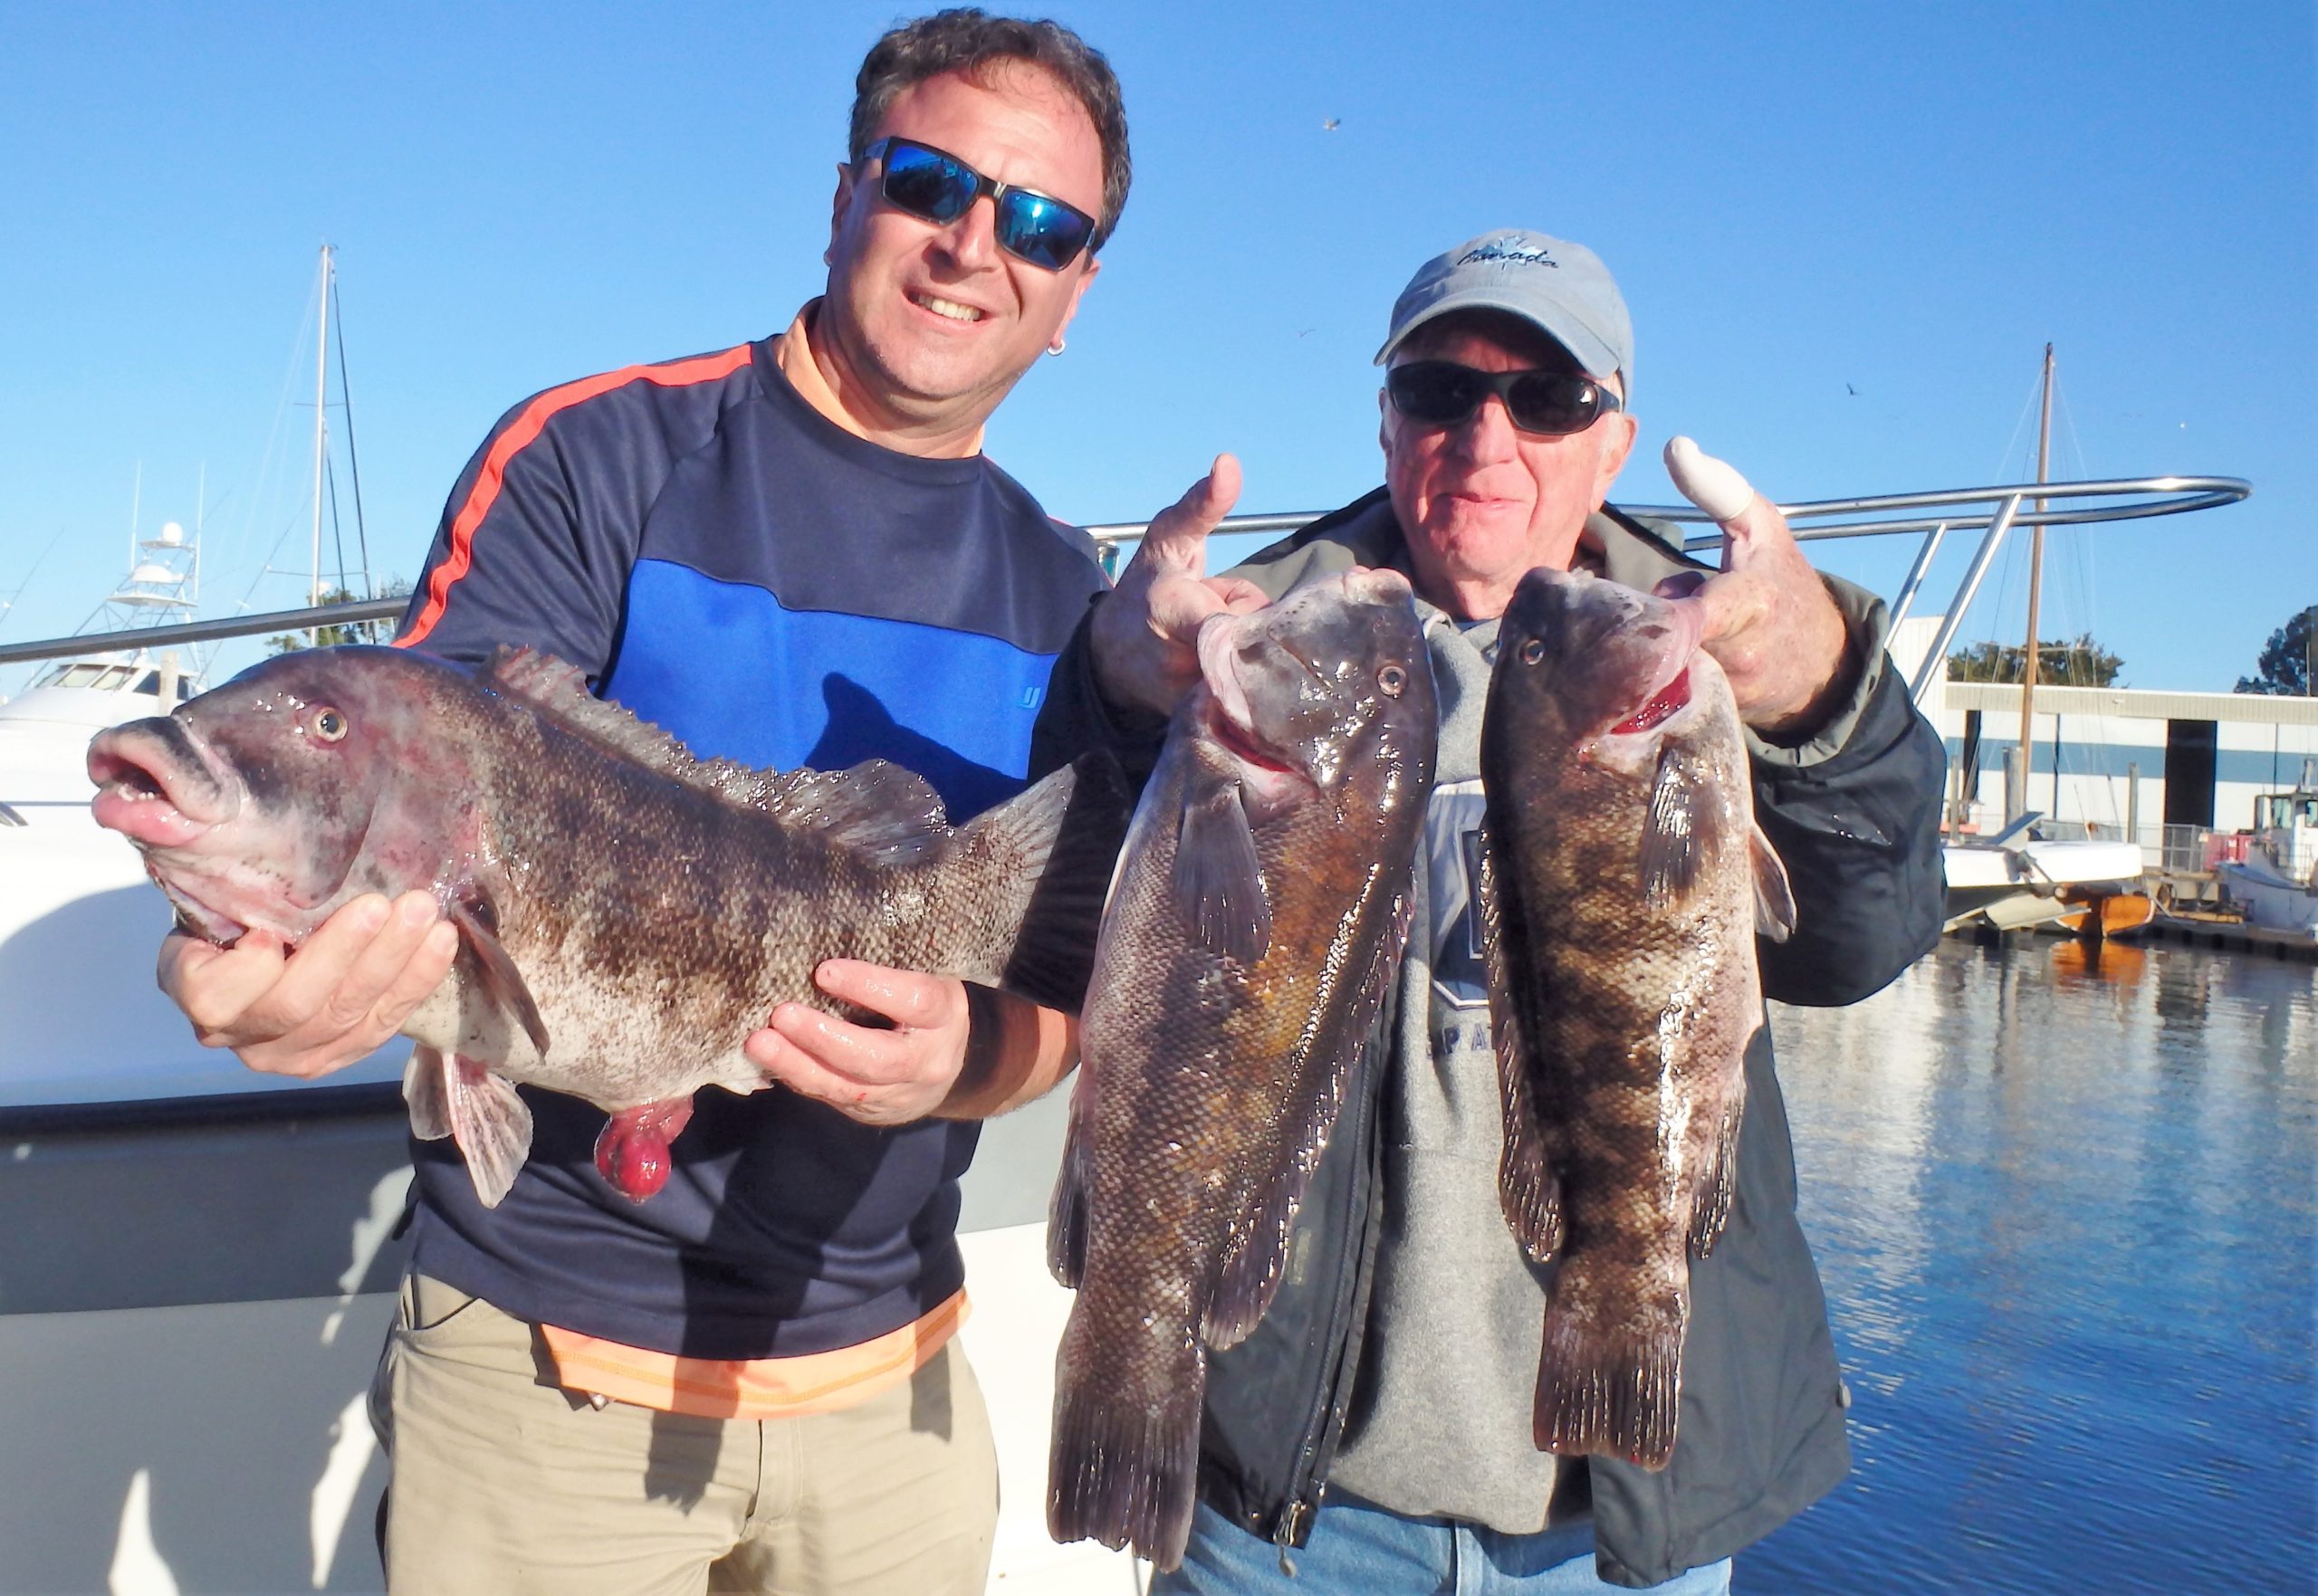 Steve Brustein of Rhode Island and Mike Weaver of New Hampshire with some of the tautog they caught off Newport in October.